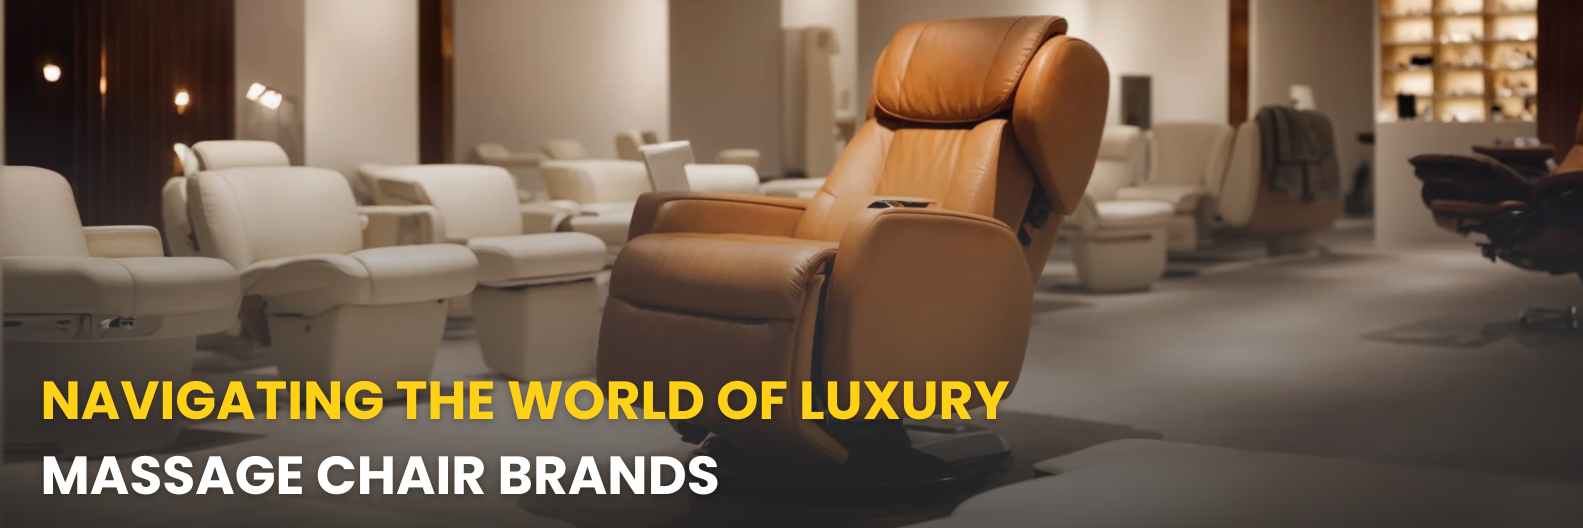 Discover top brands and explore the world of luxury massage chairs. Learn about the greatest massage chair brands in the industry.